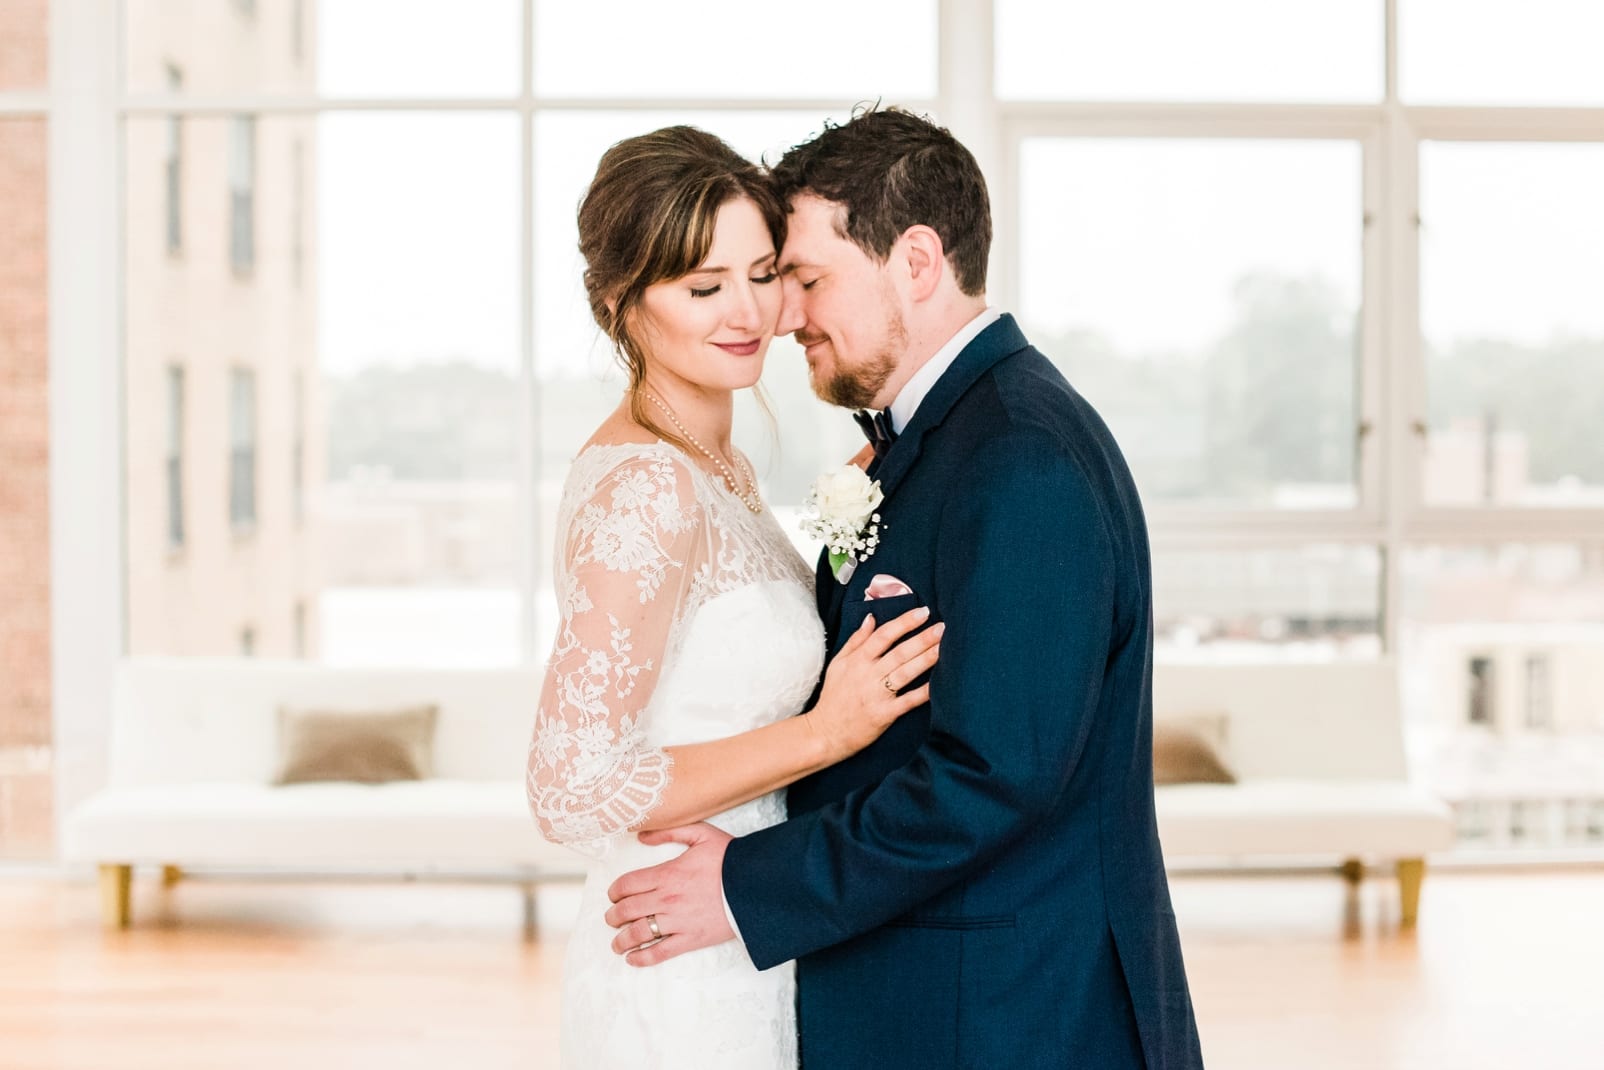 The Glass Box bride and groom snuggled together in front of all glass windows photo